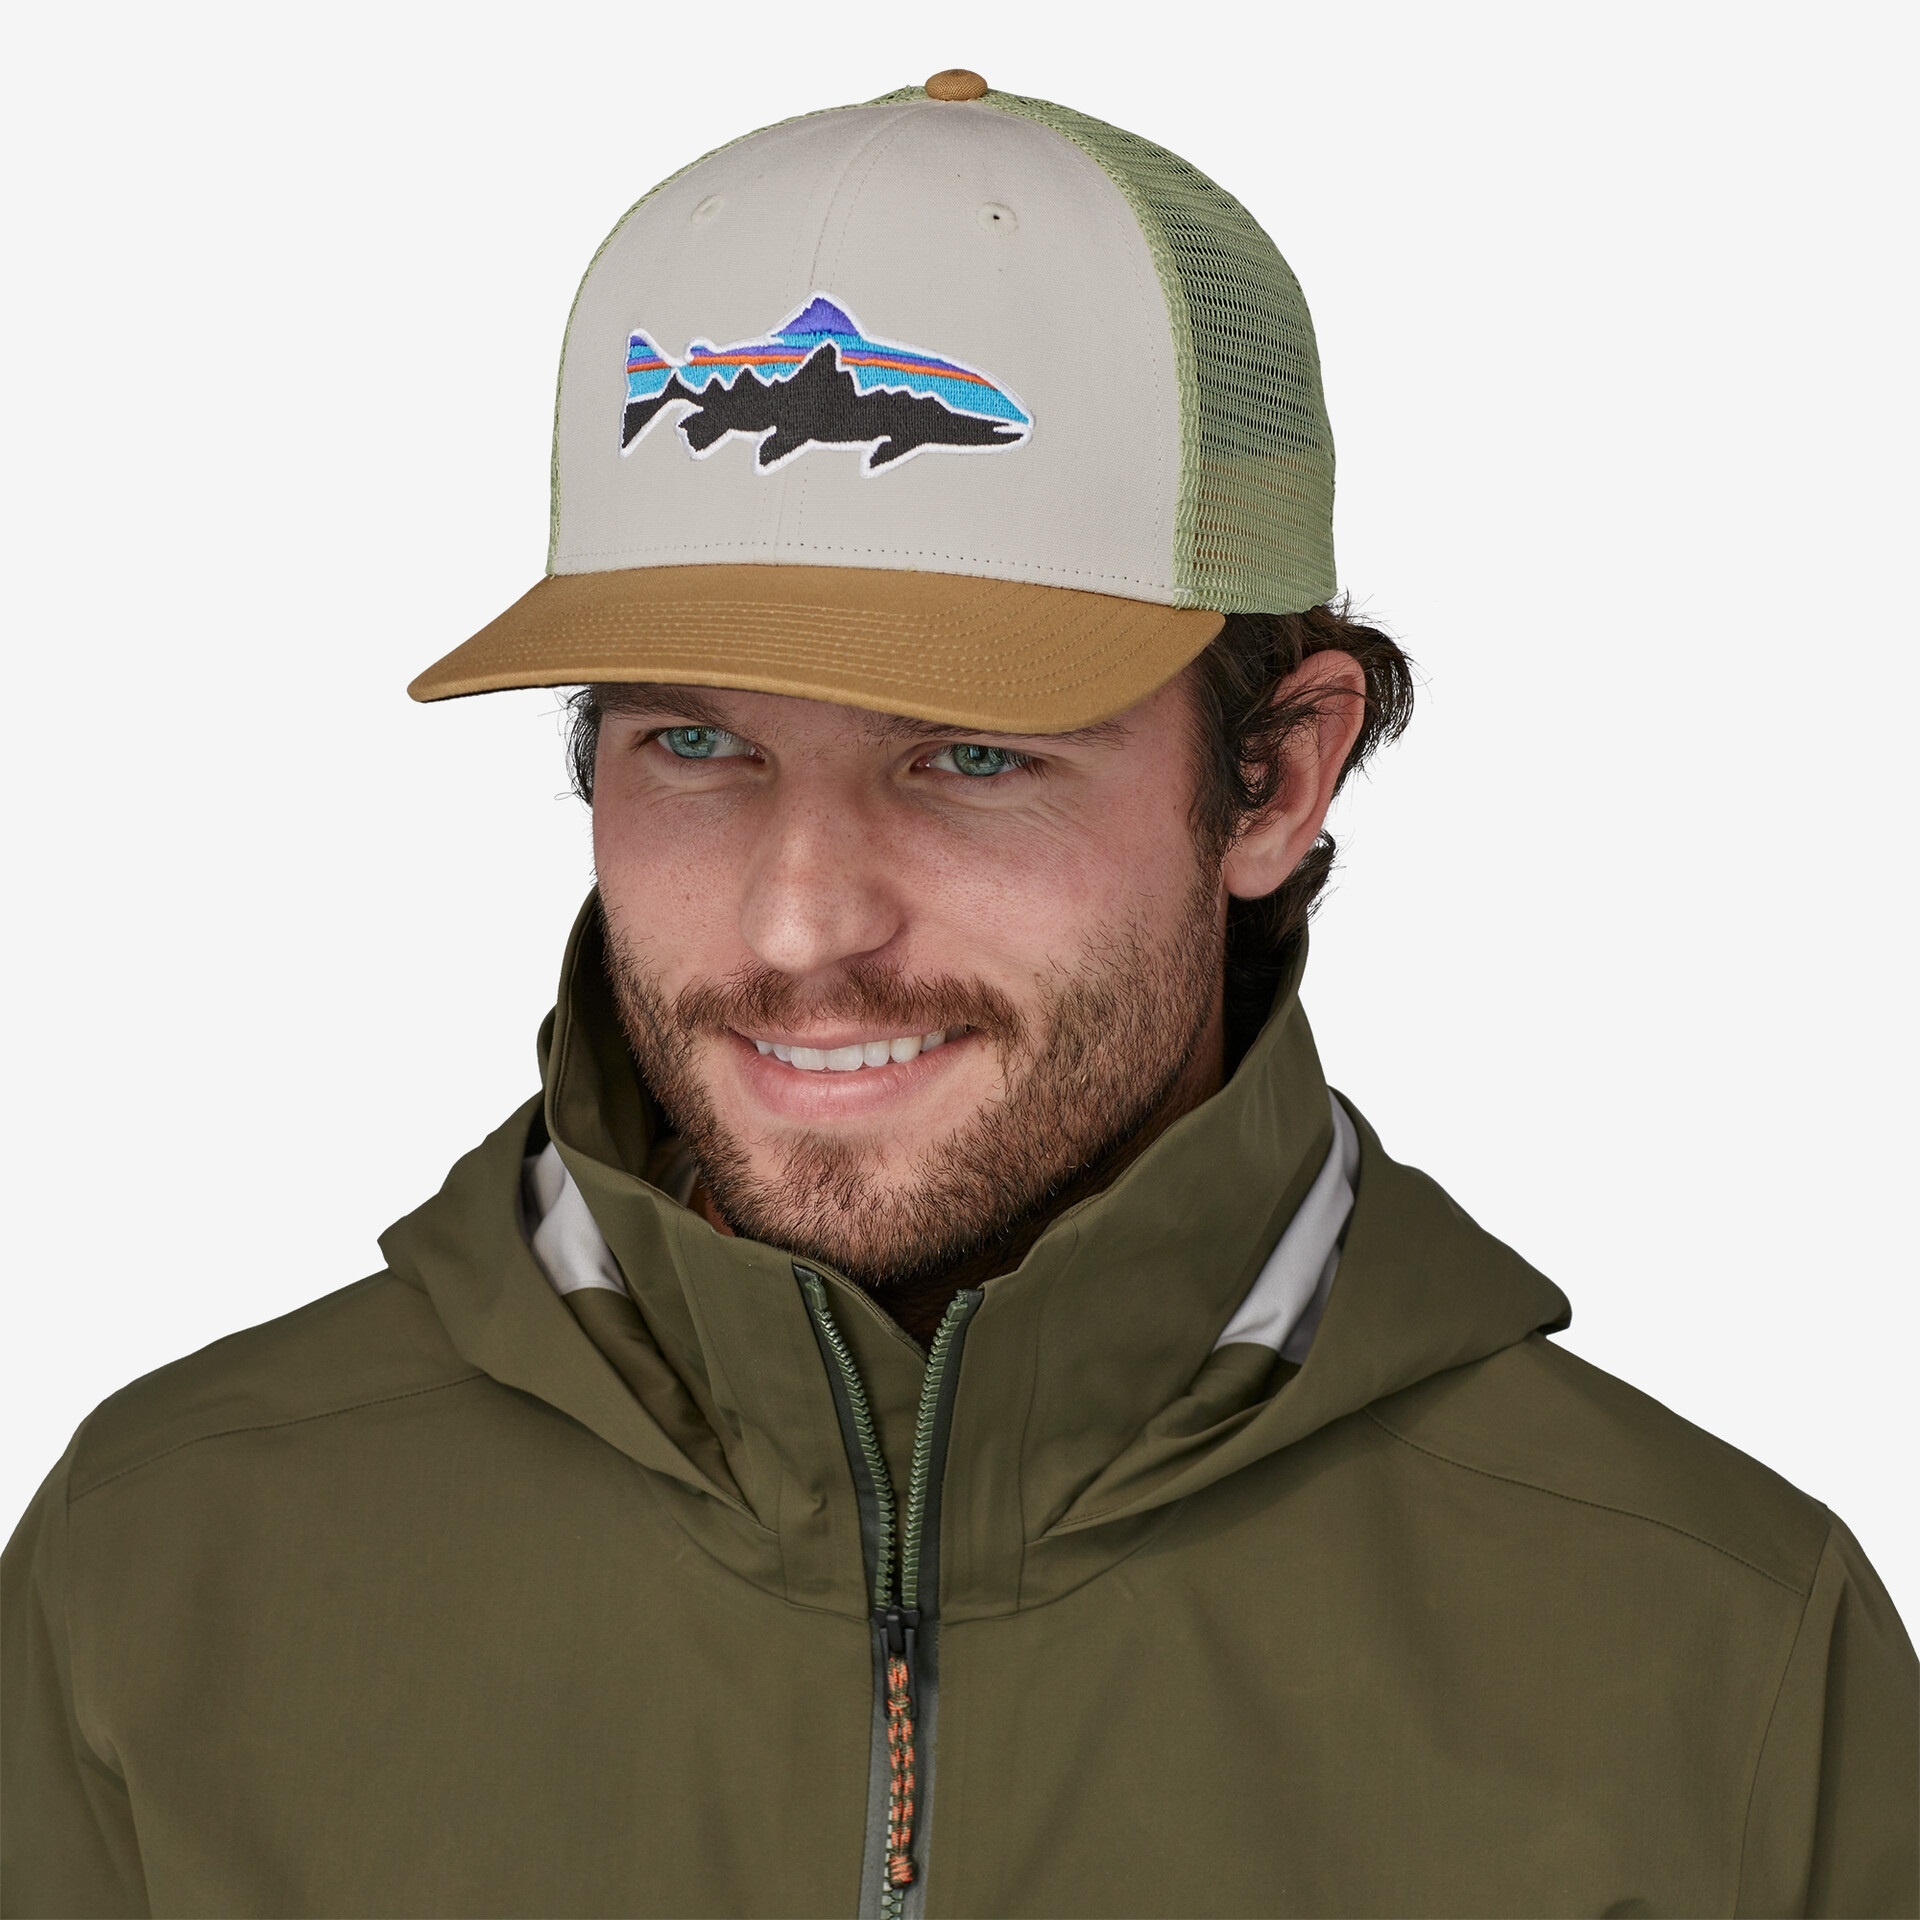 Patagonia Fitz Roy Trout Trucker Hat White w/Classic Tan